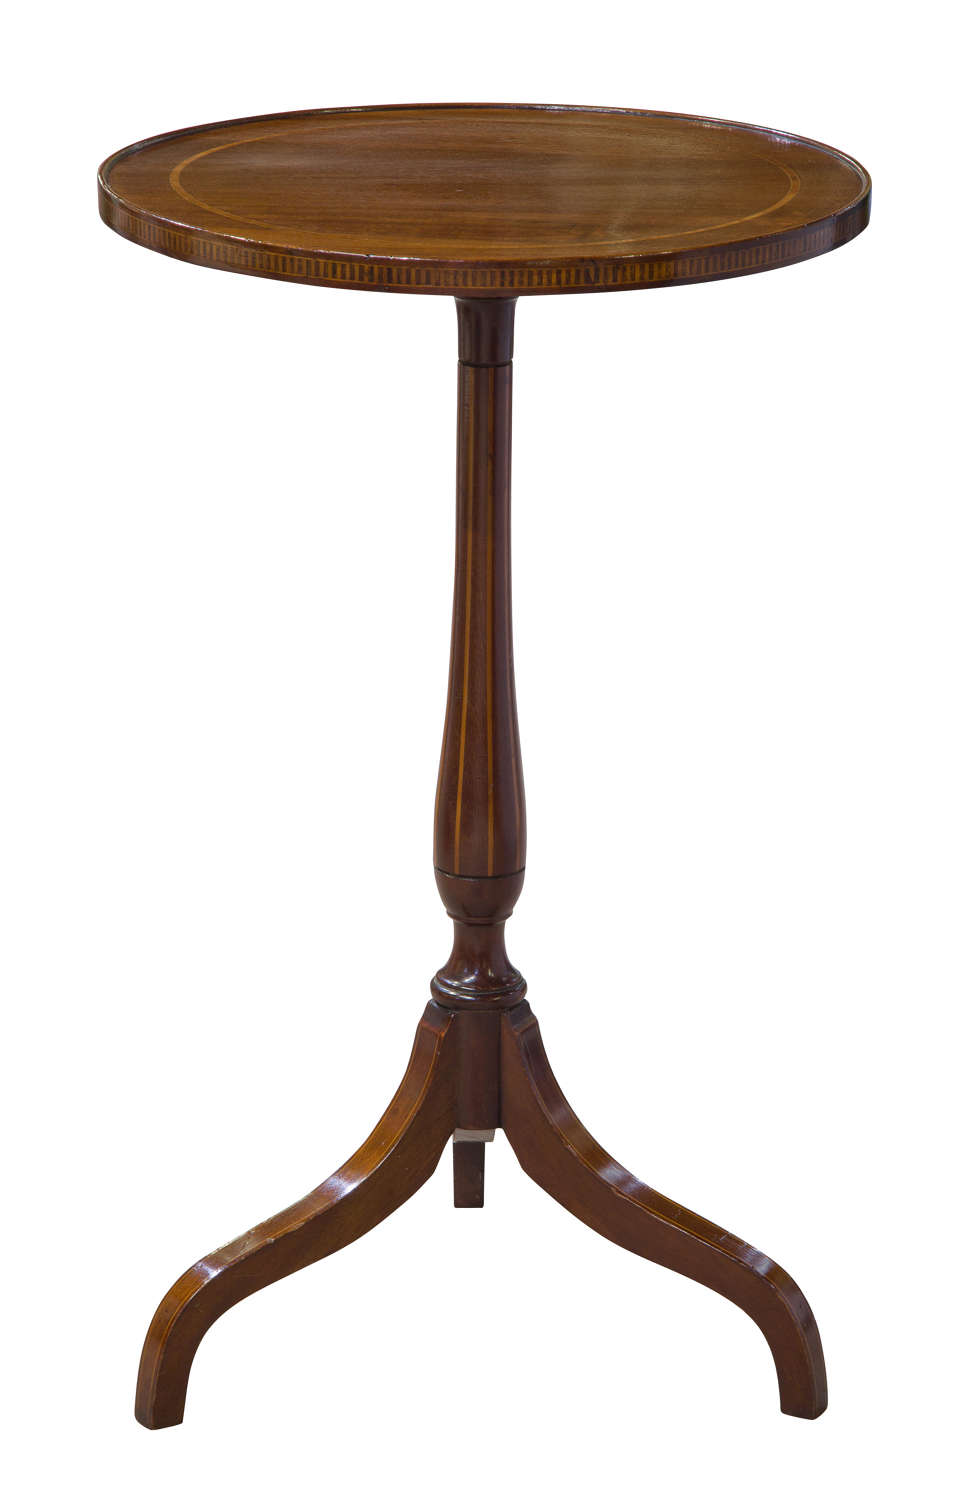 Late 19thc Circular Occasional Table